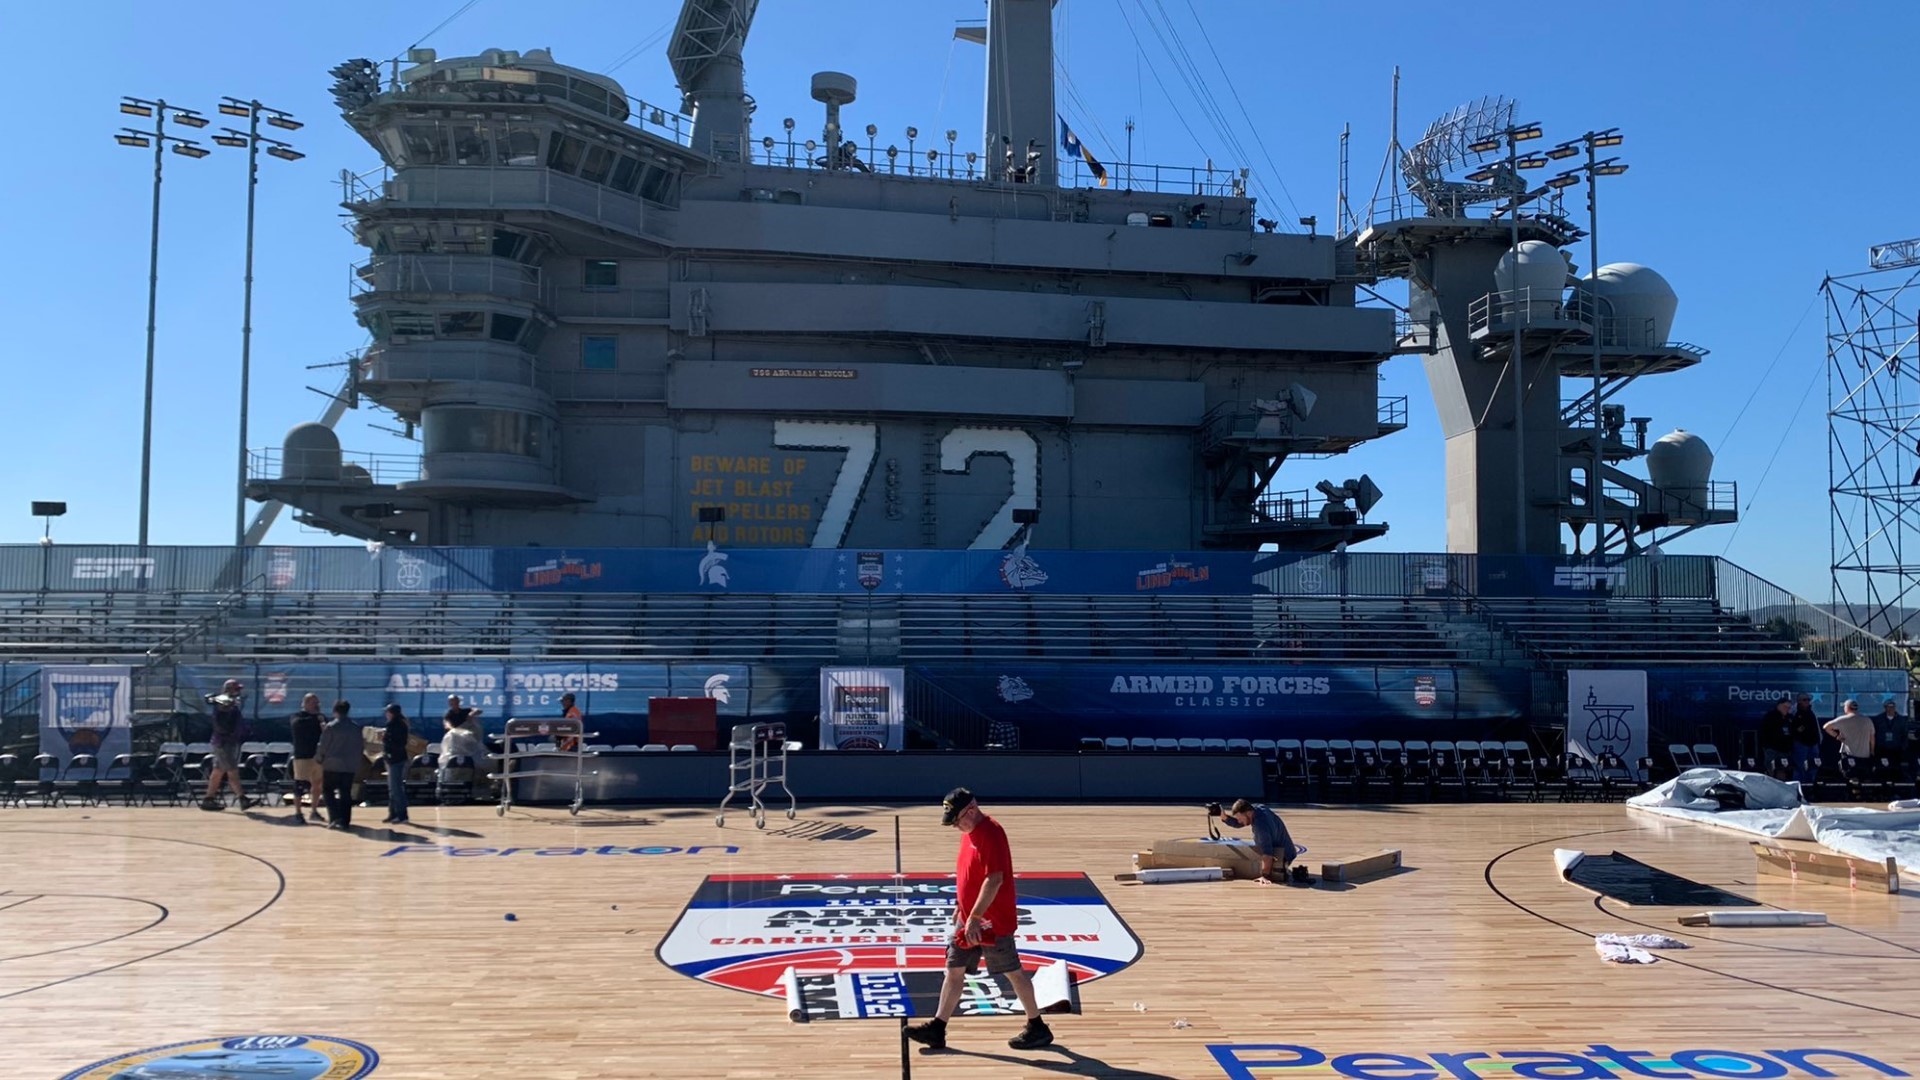 Gonzaga and Michigan State meet for a basketball game aboard an aircraft carrier on Friday.